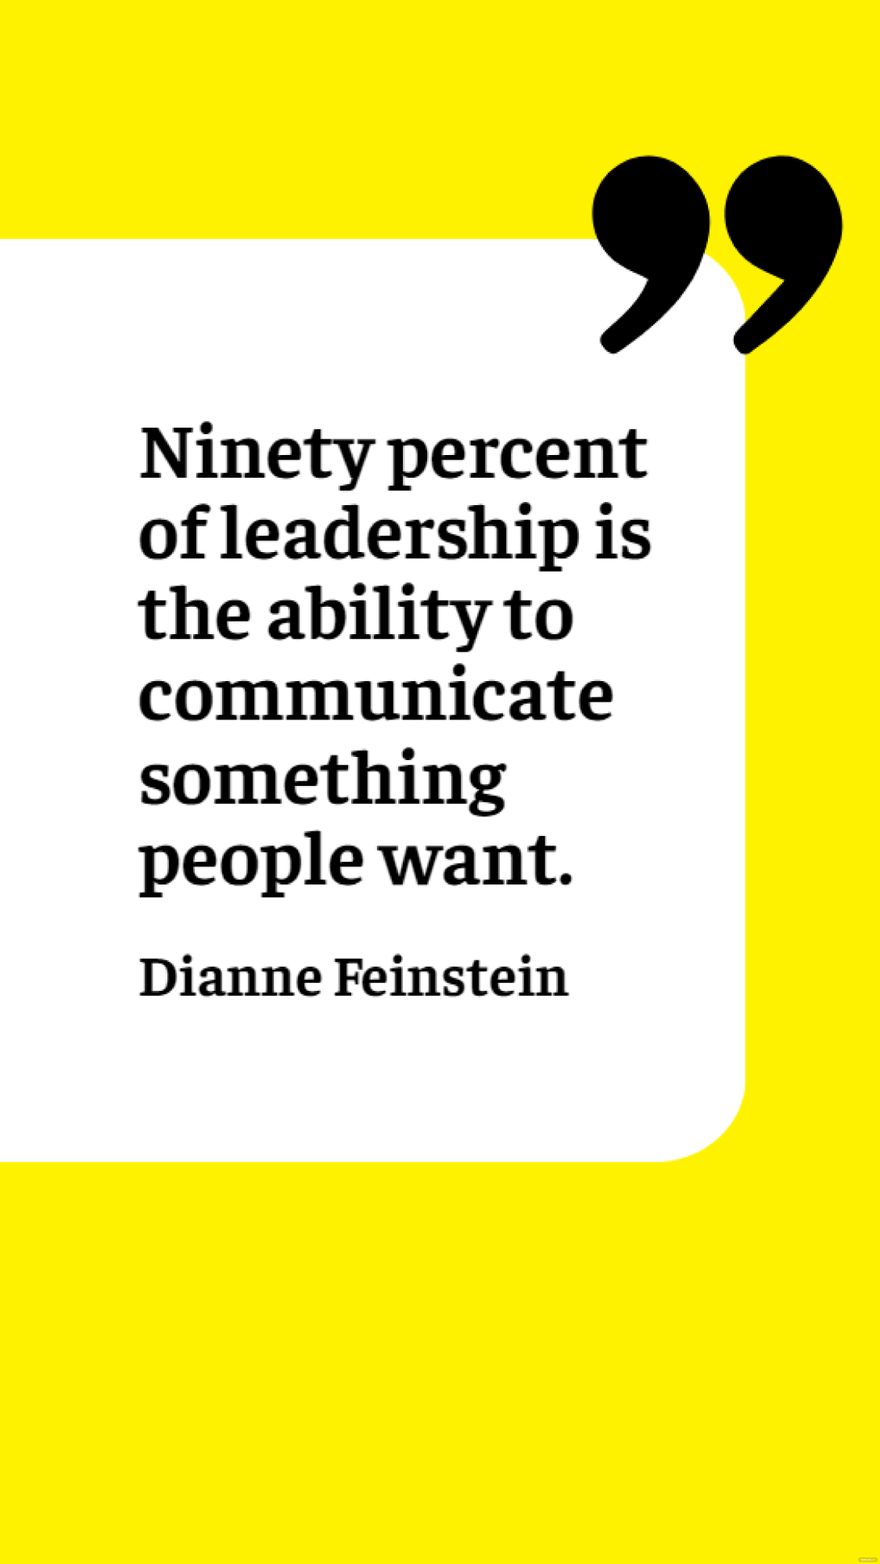 Dianne Feinstein - Ninety percent of leadership is the ability to communicate something people want.